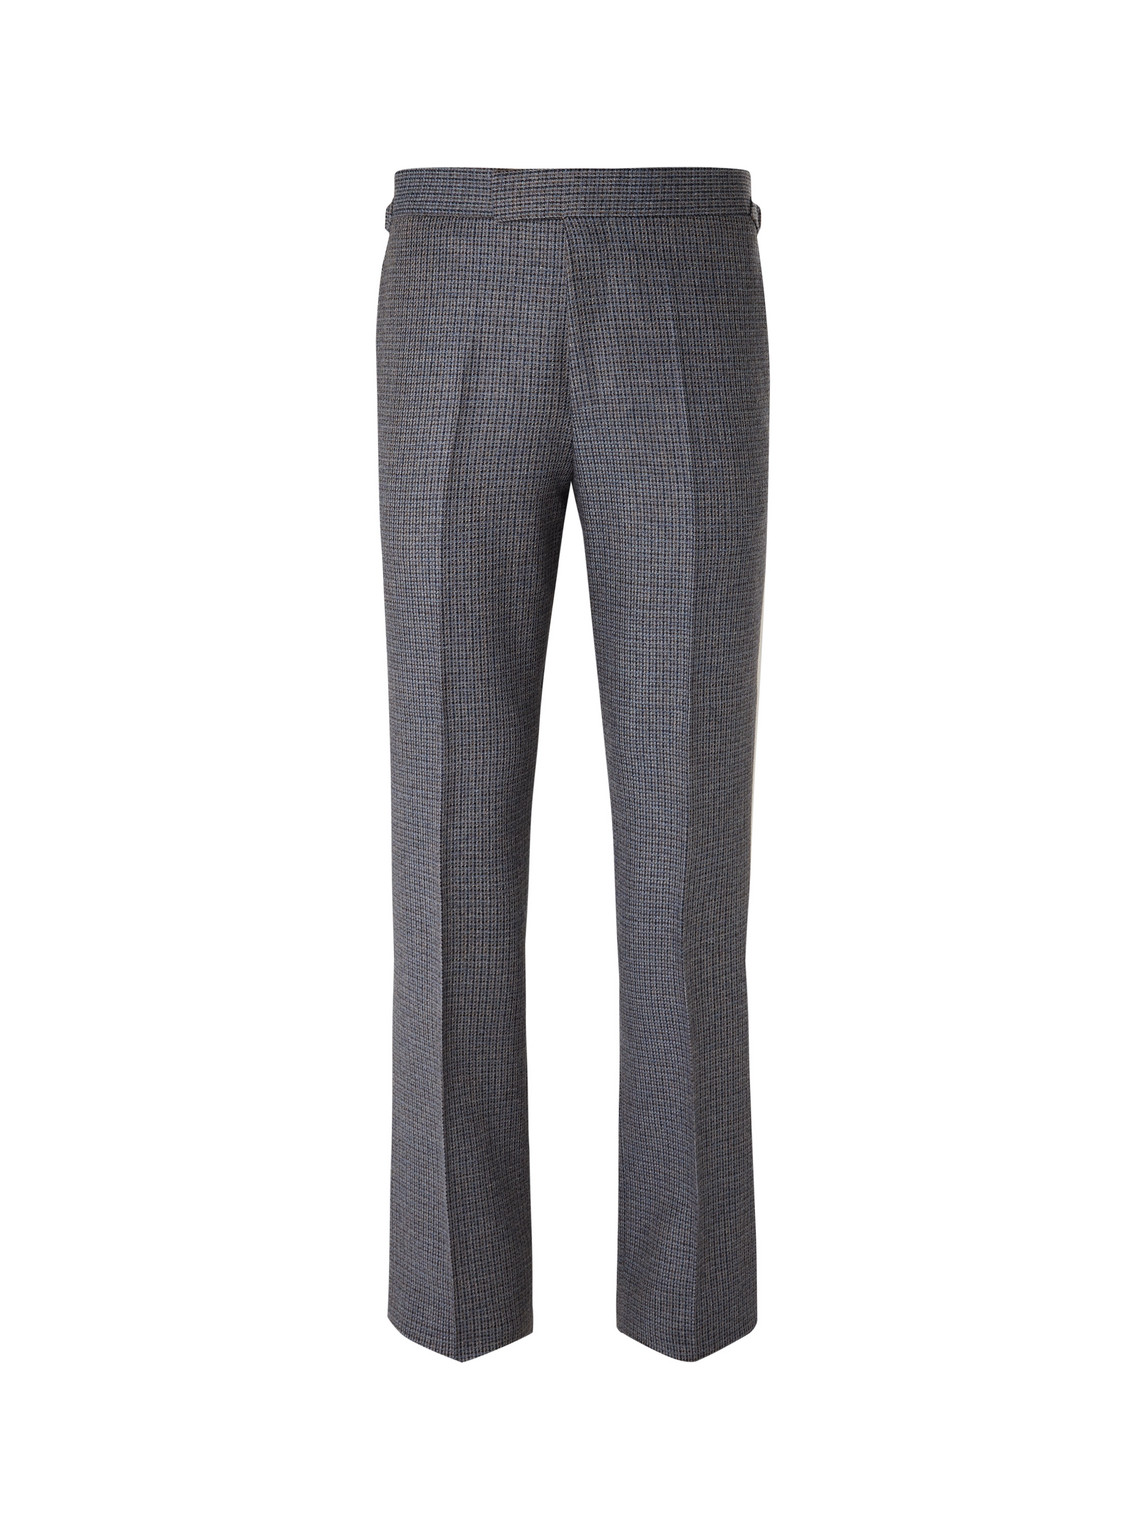 Conrad Slim-Fit Checked Wool Suit Trousers